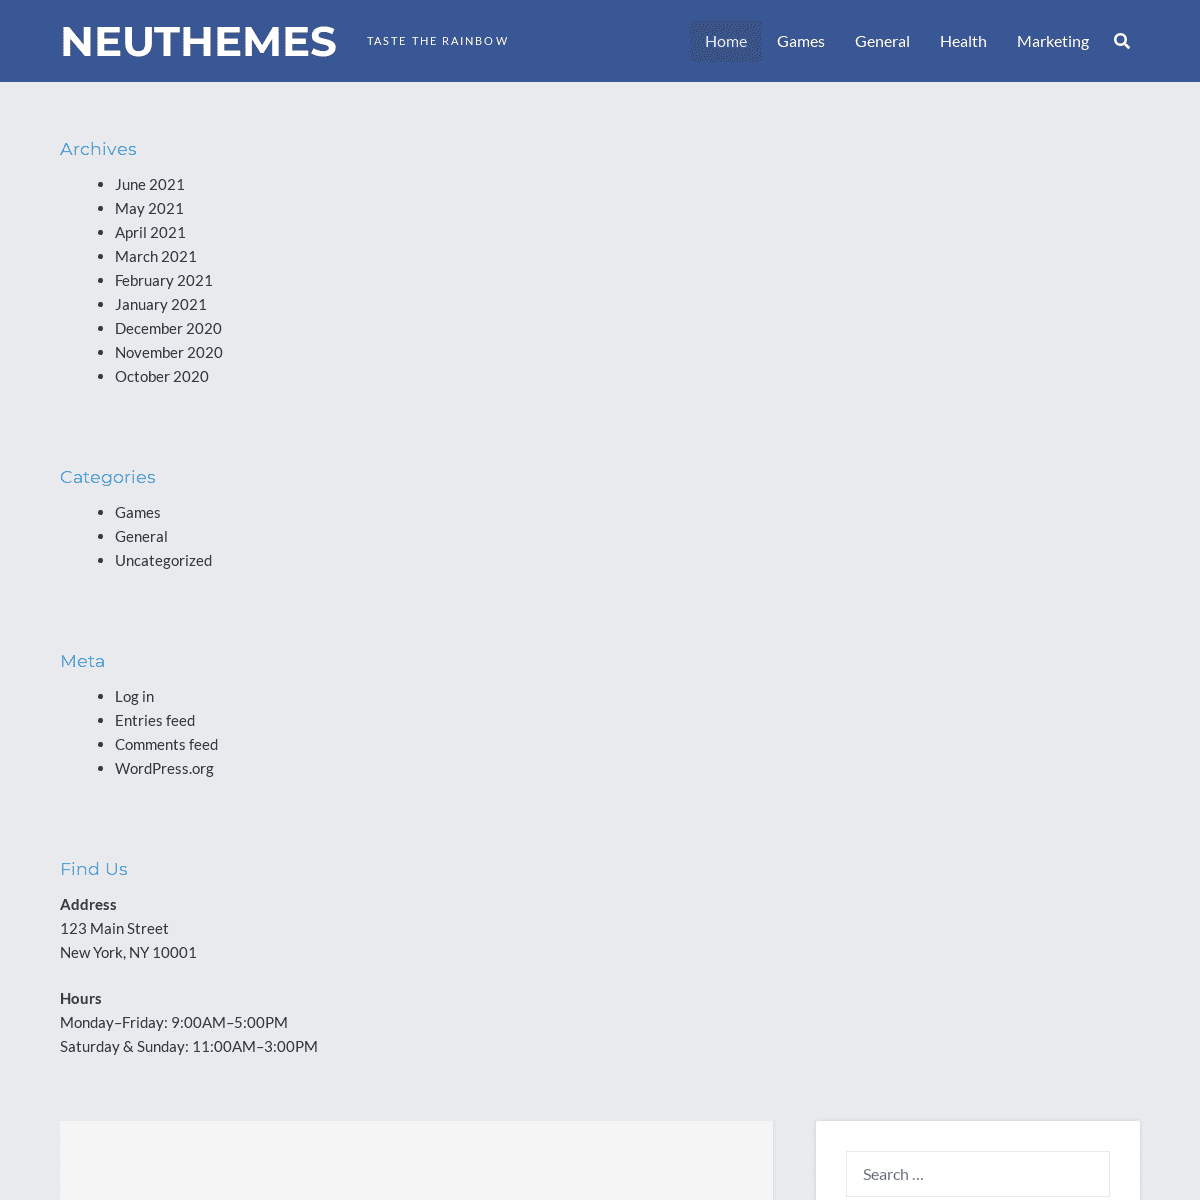 A complete backup of https://neuthemes.net